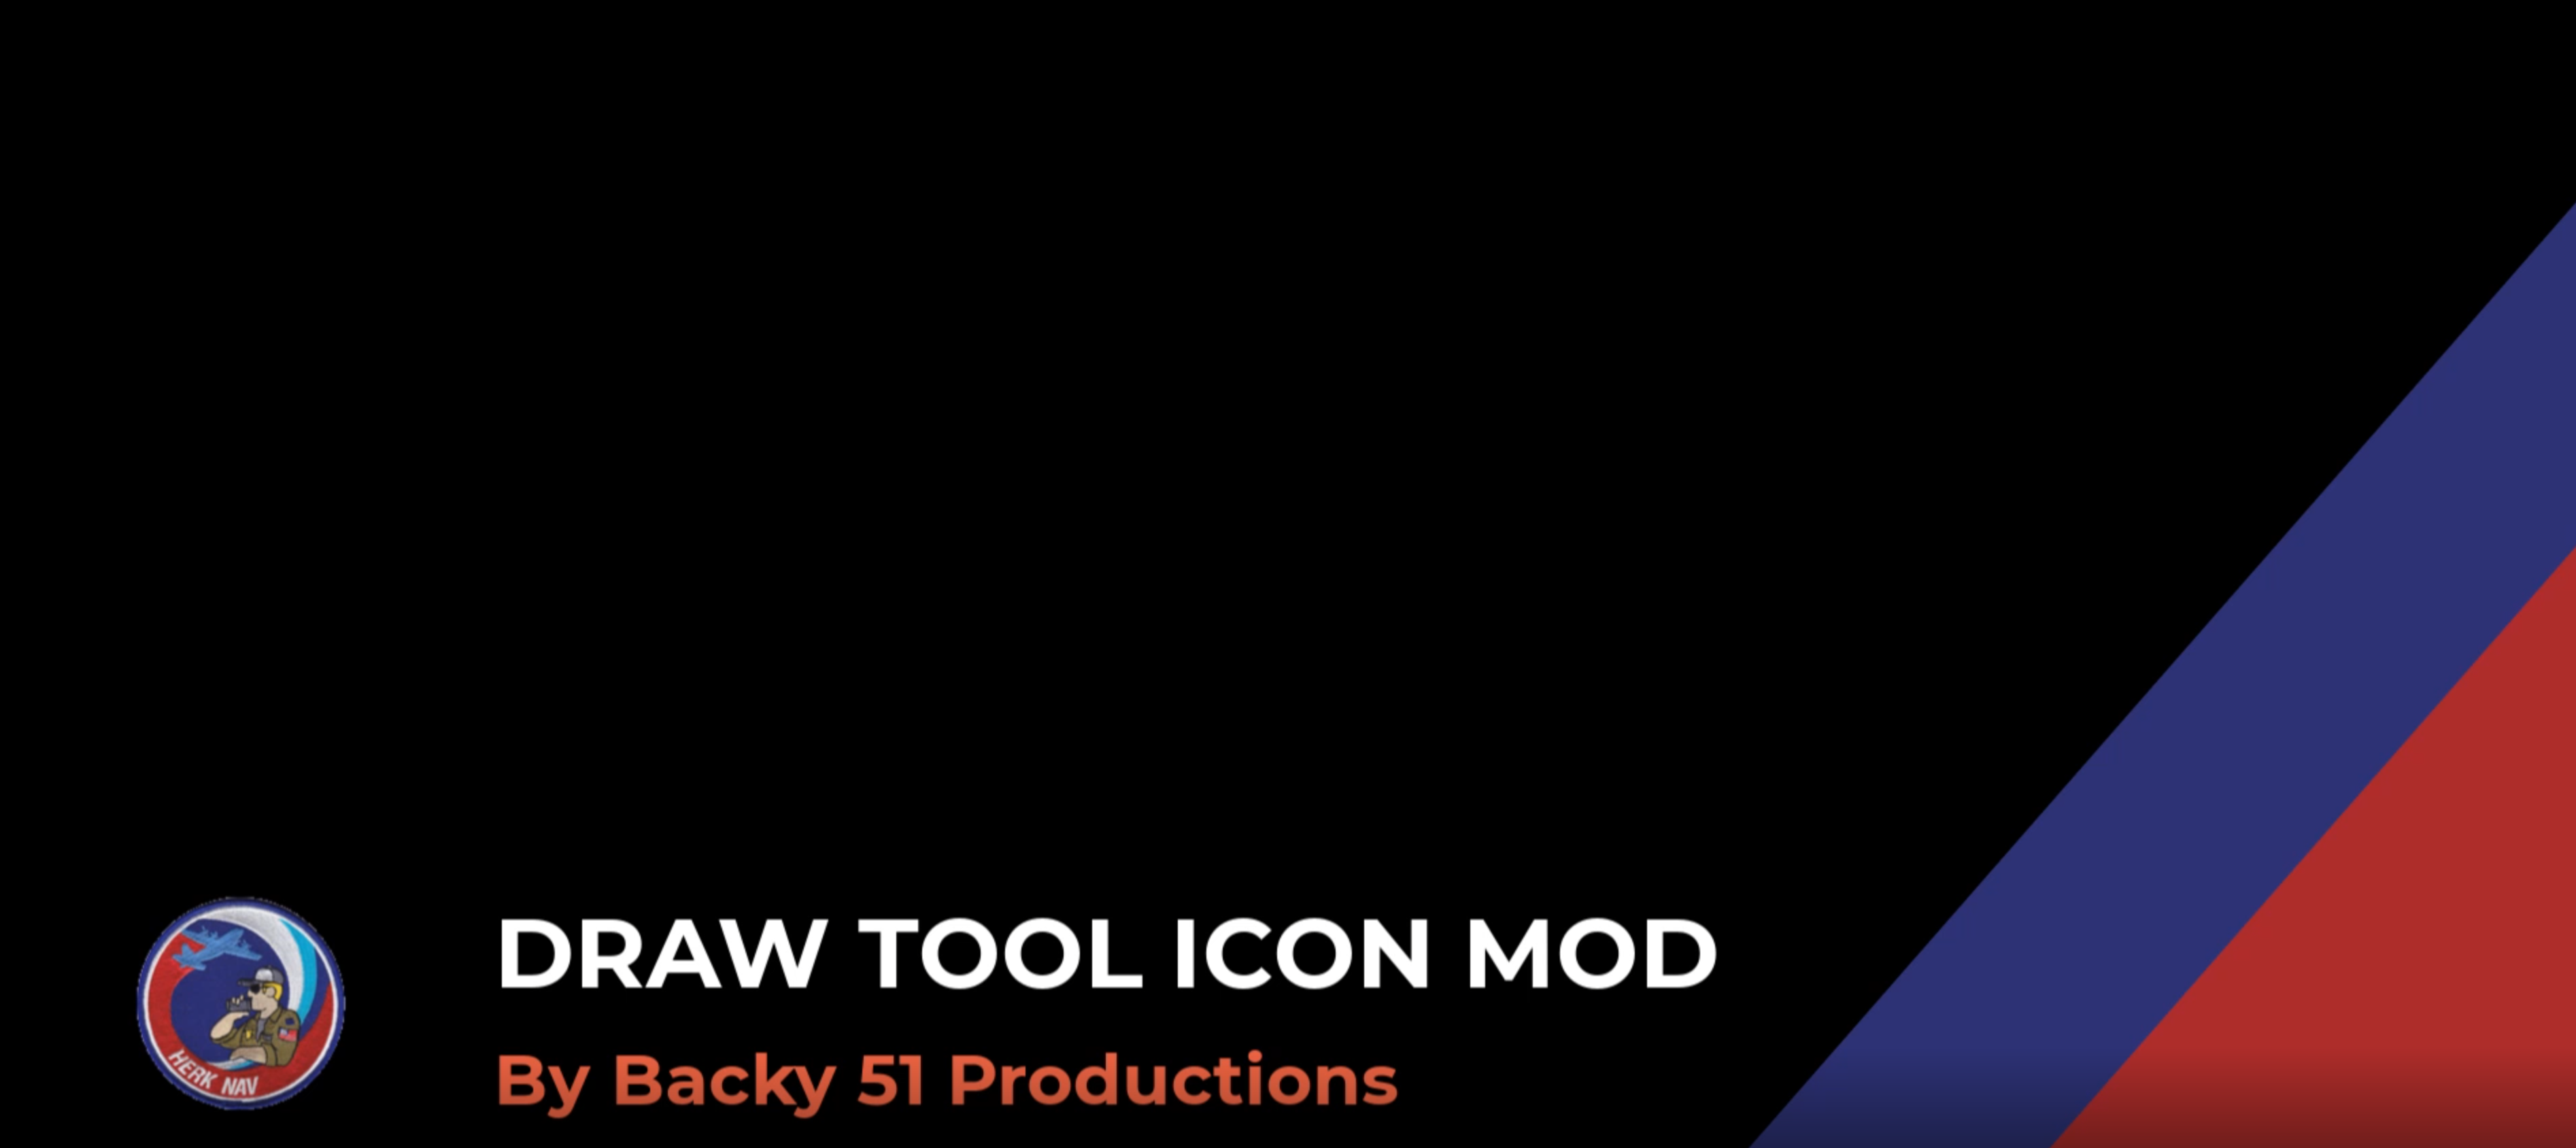 DRAW TOOL ICON MOD V1.1 Update 